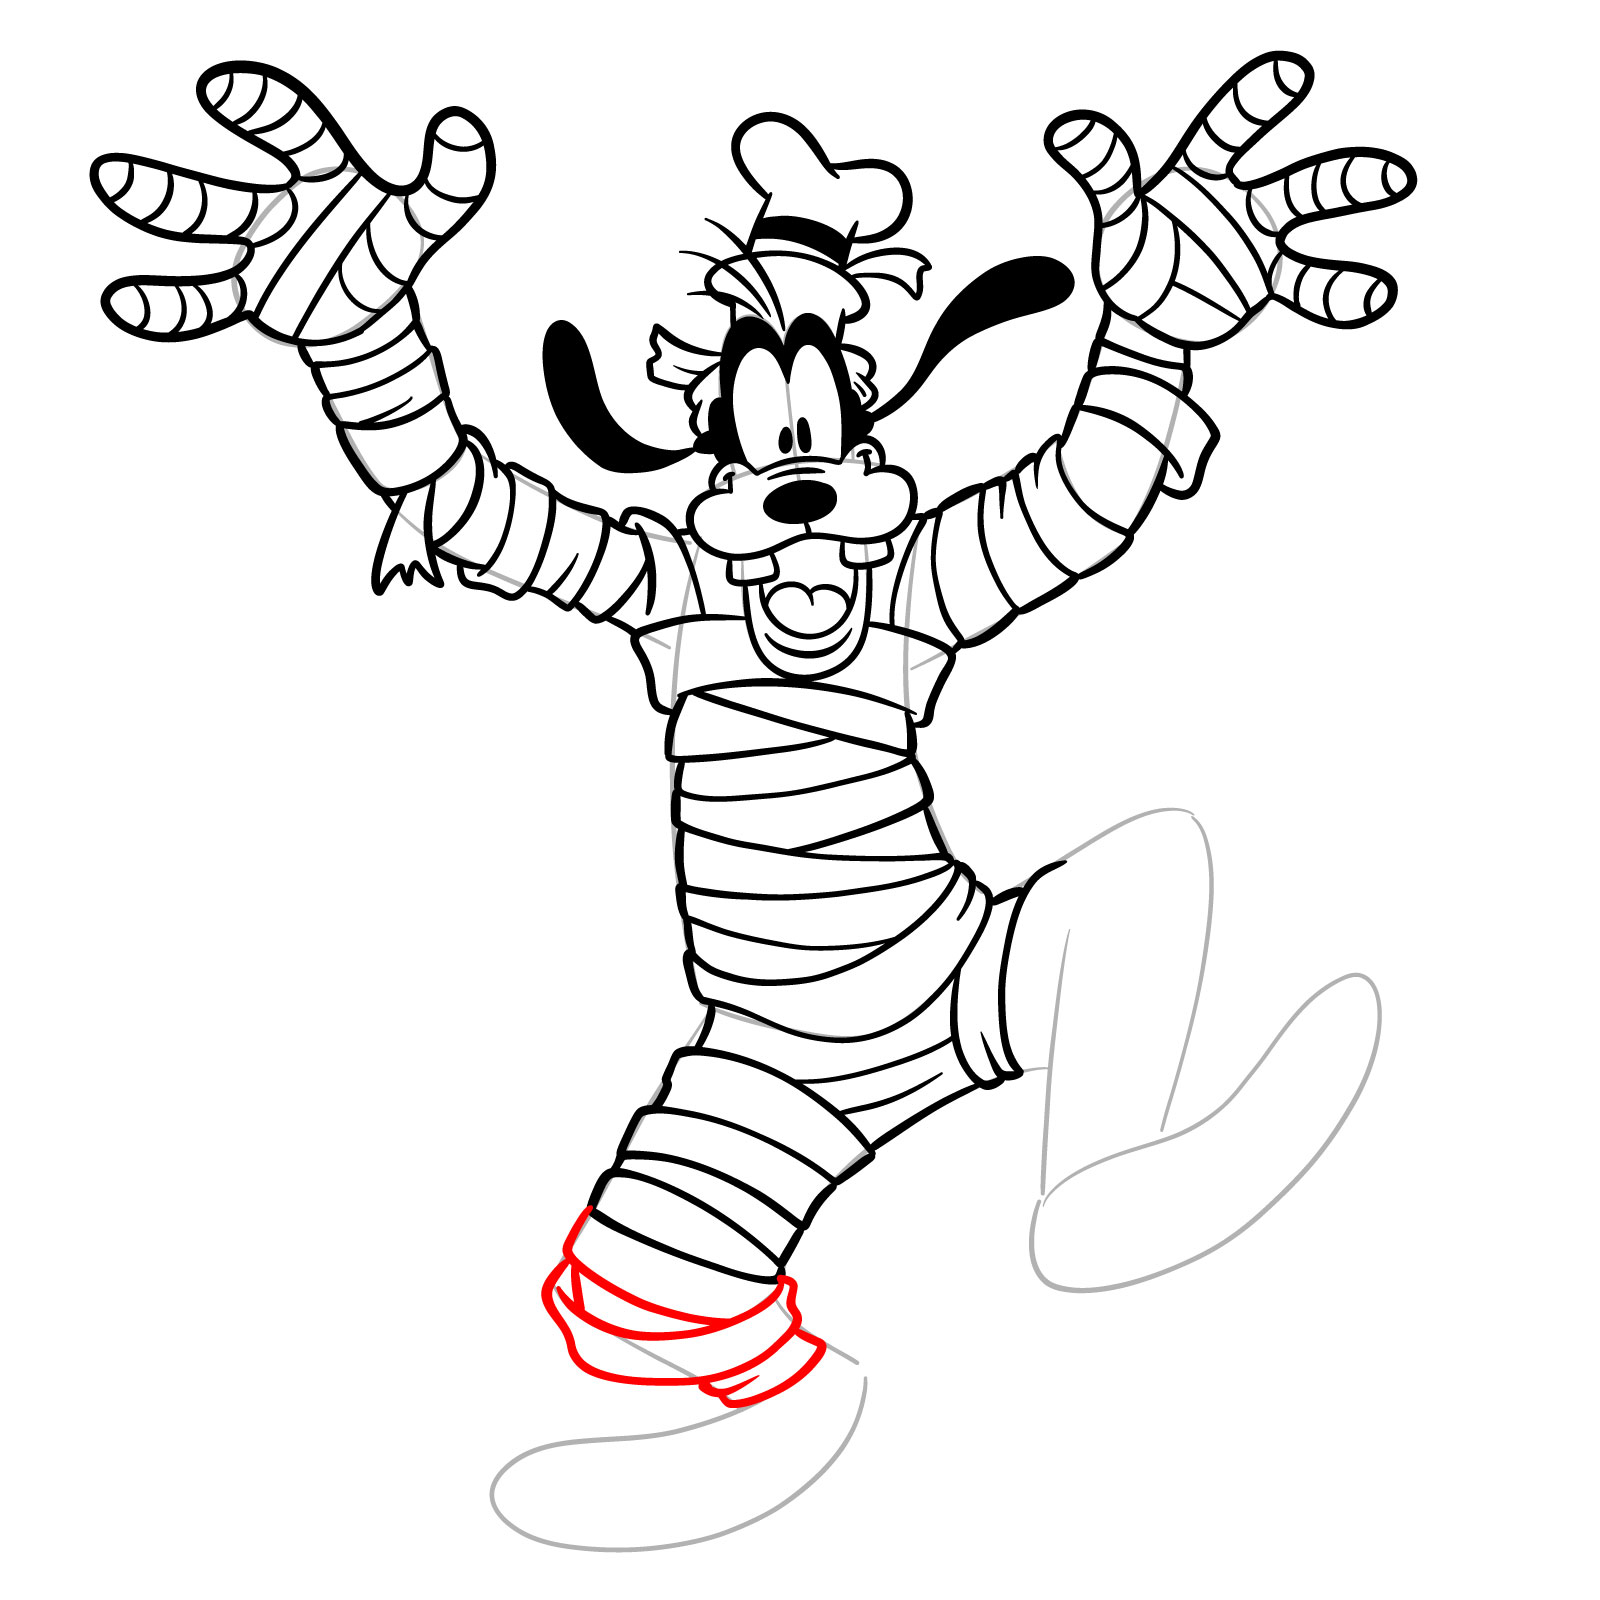 How to draw Halloween Goofy as a mummy - step 26